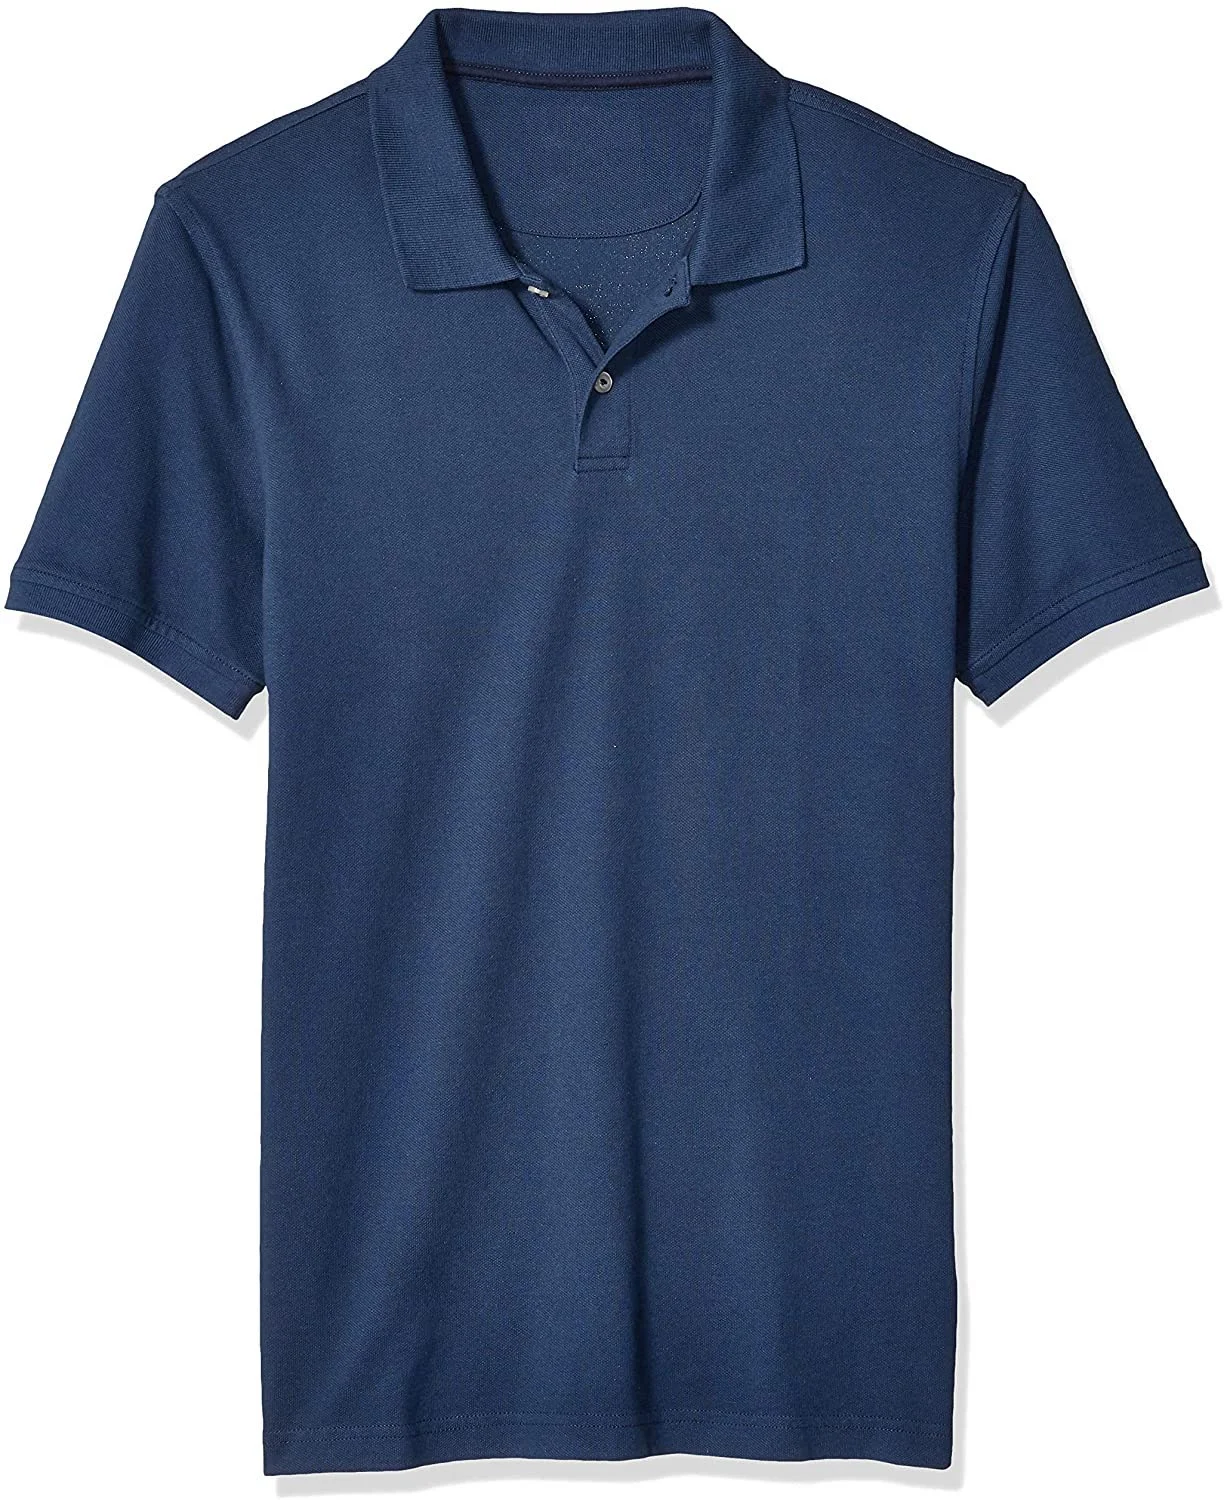 Polyester Polo Shirts - Bangladesh Factory, Suppliers, Manufacturers